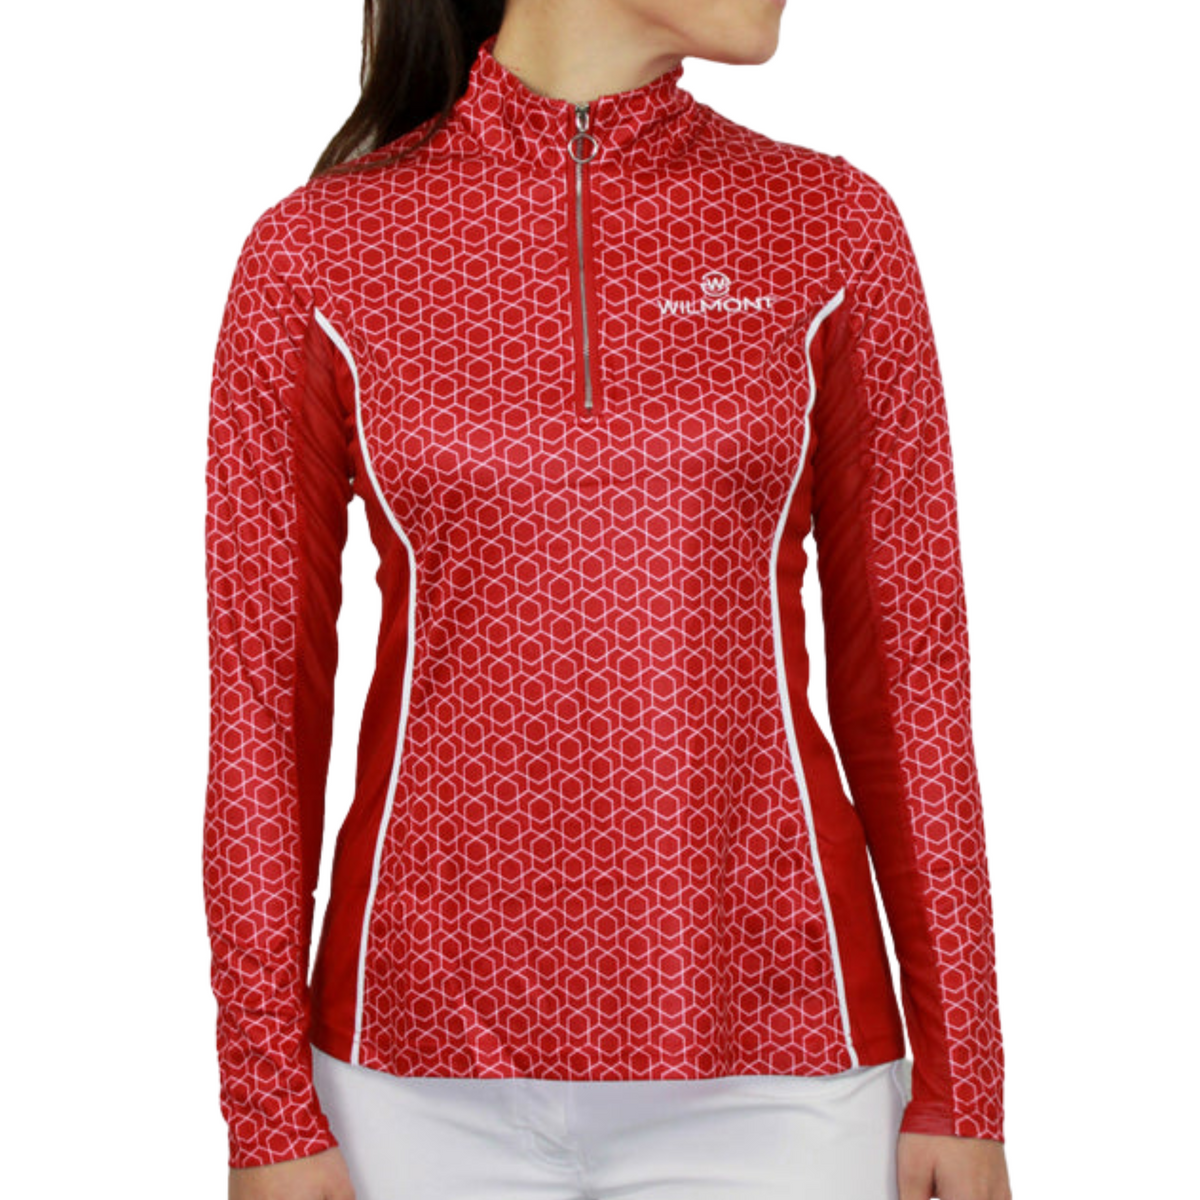 Red half zip long sleeve with geometric patterns and white logo.